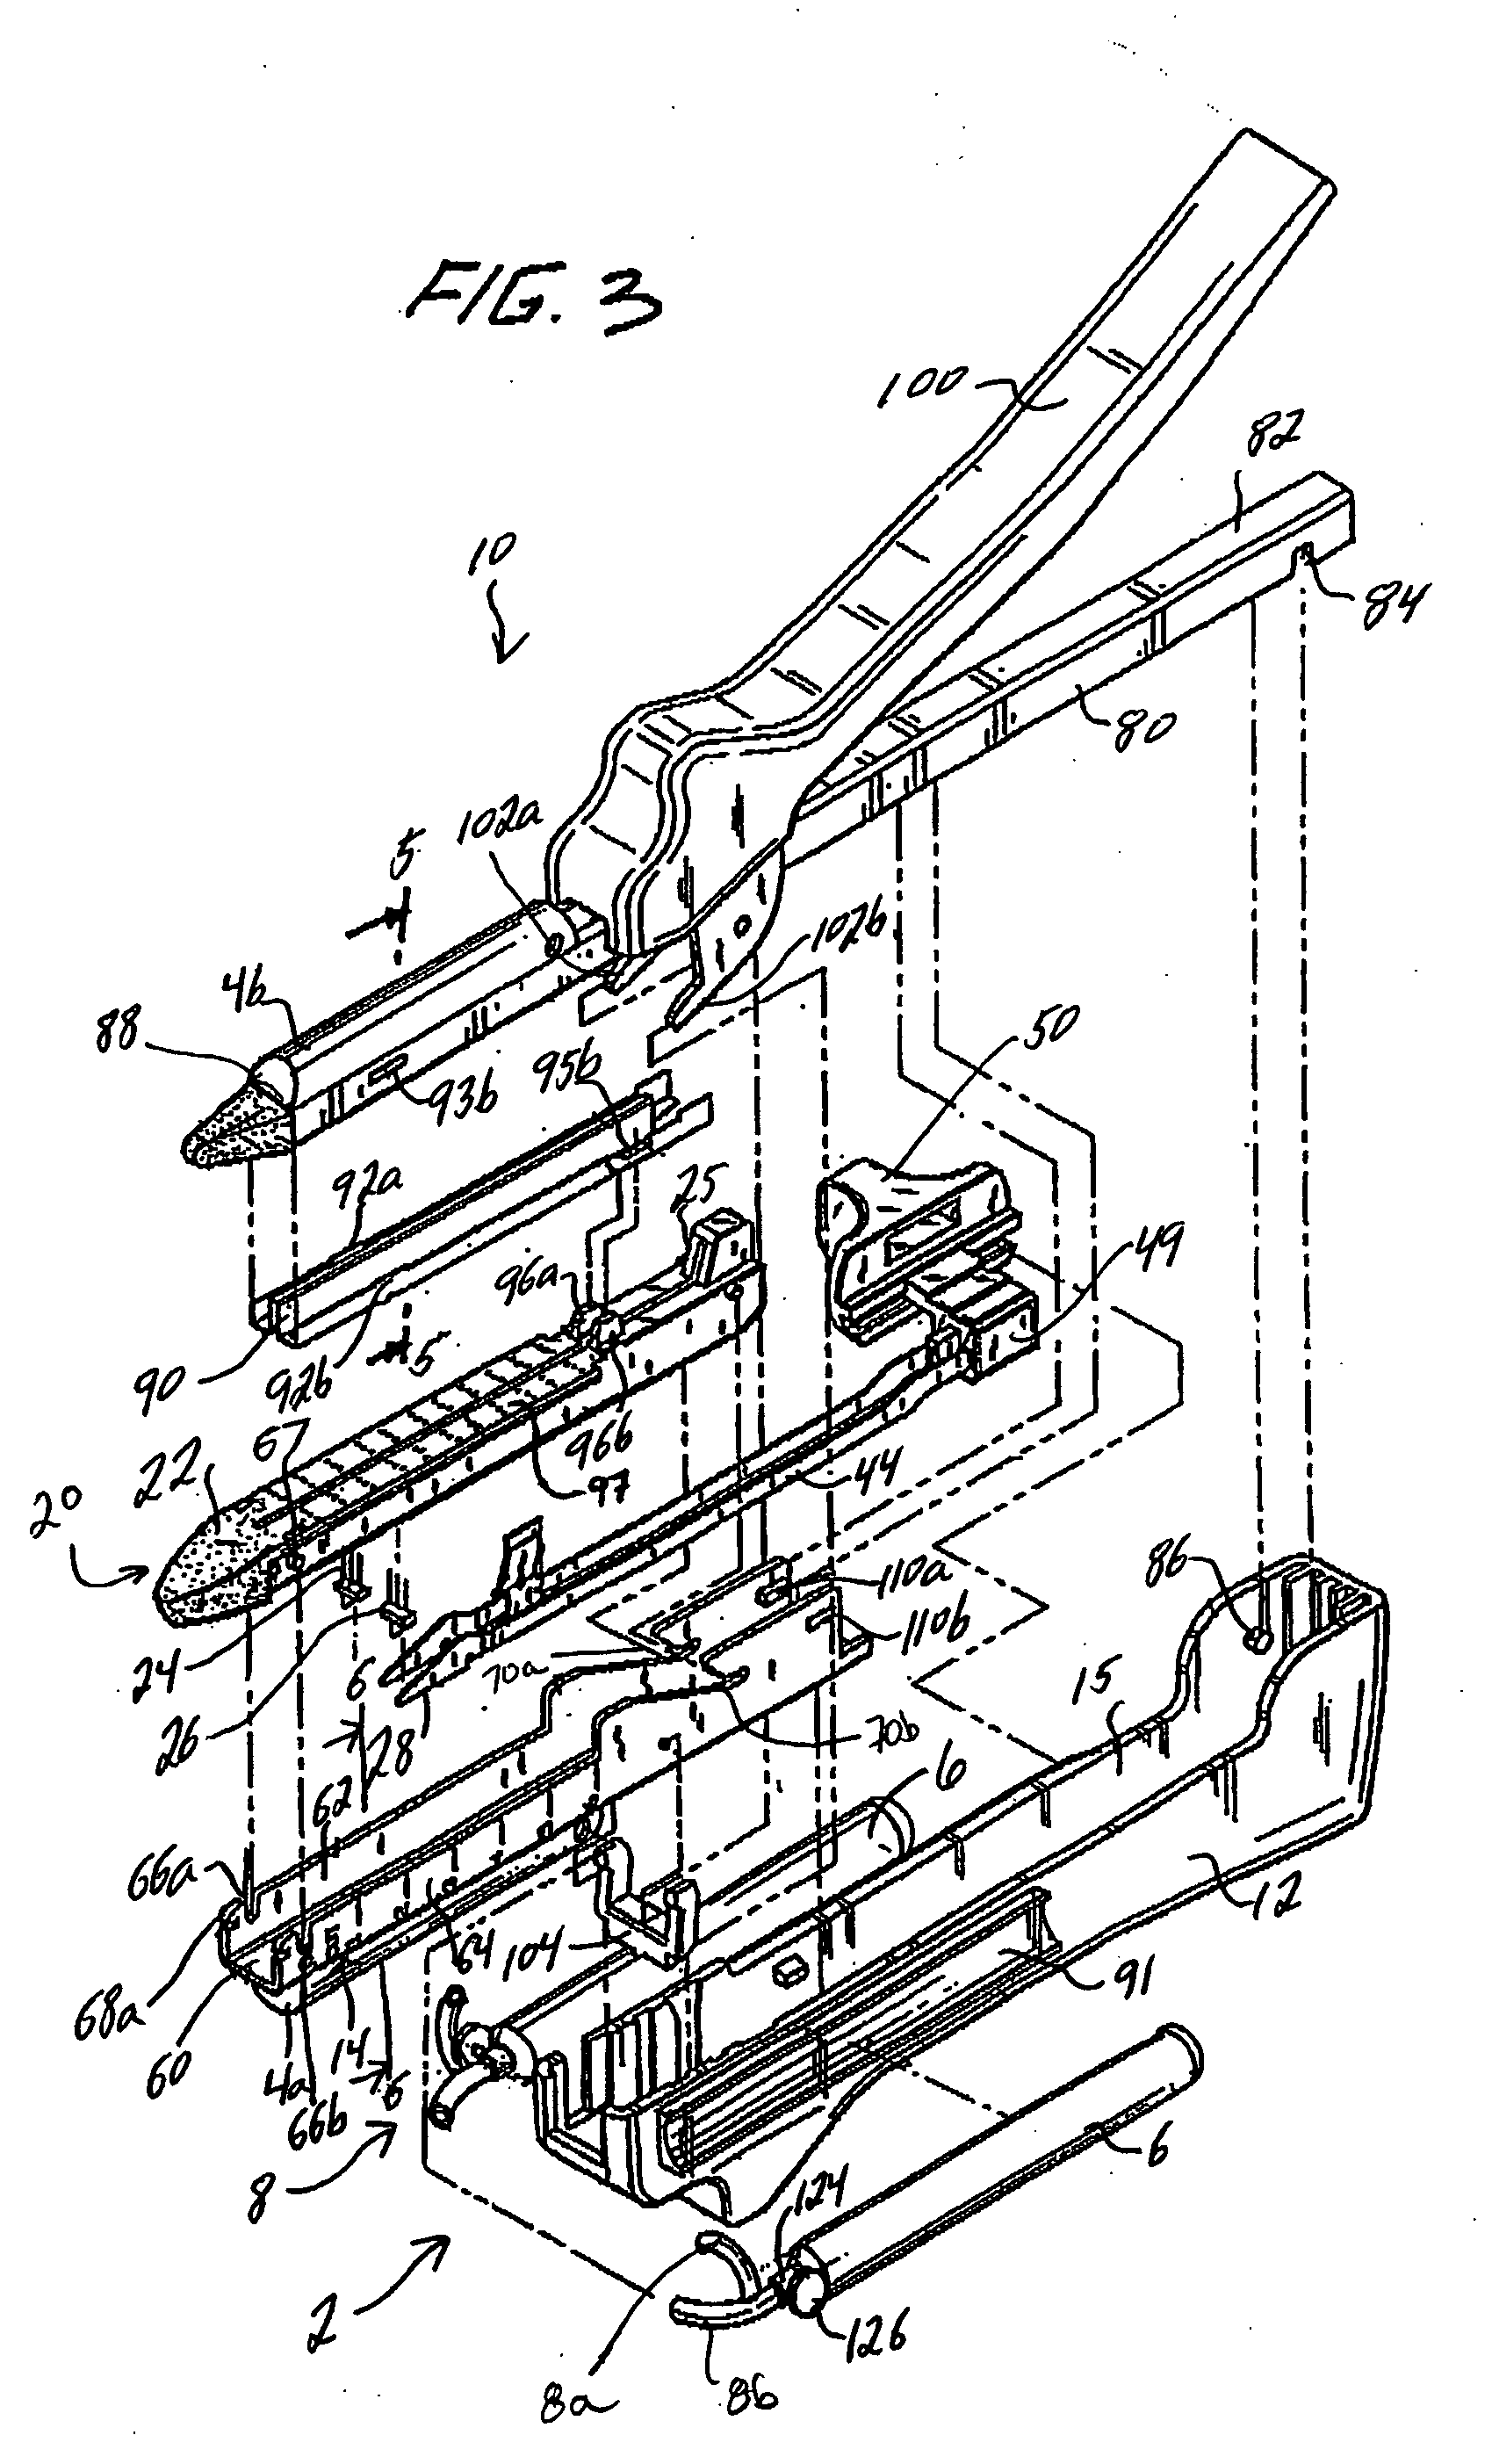 Apparatus for applying wound treatment material using tissue-penetrating needles